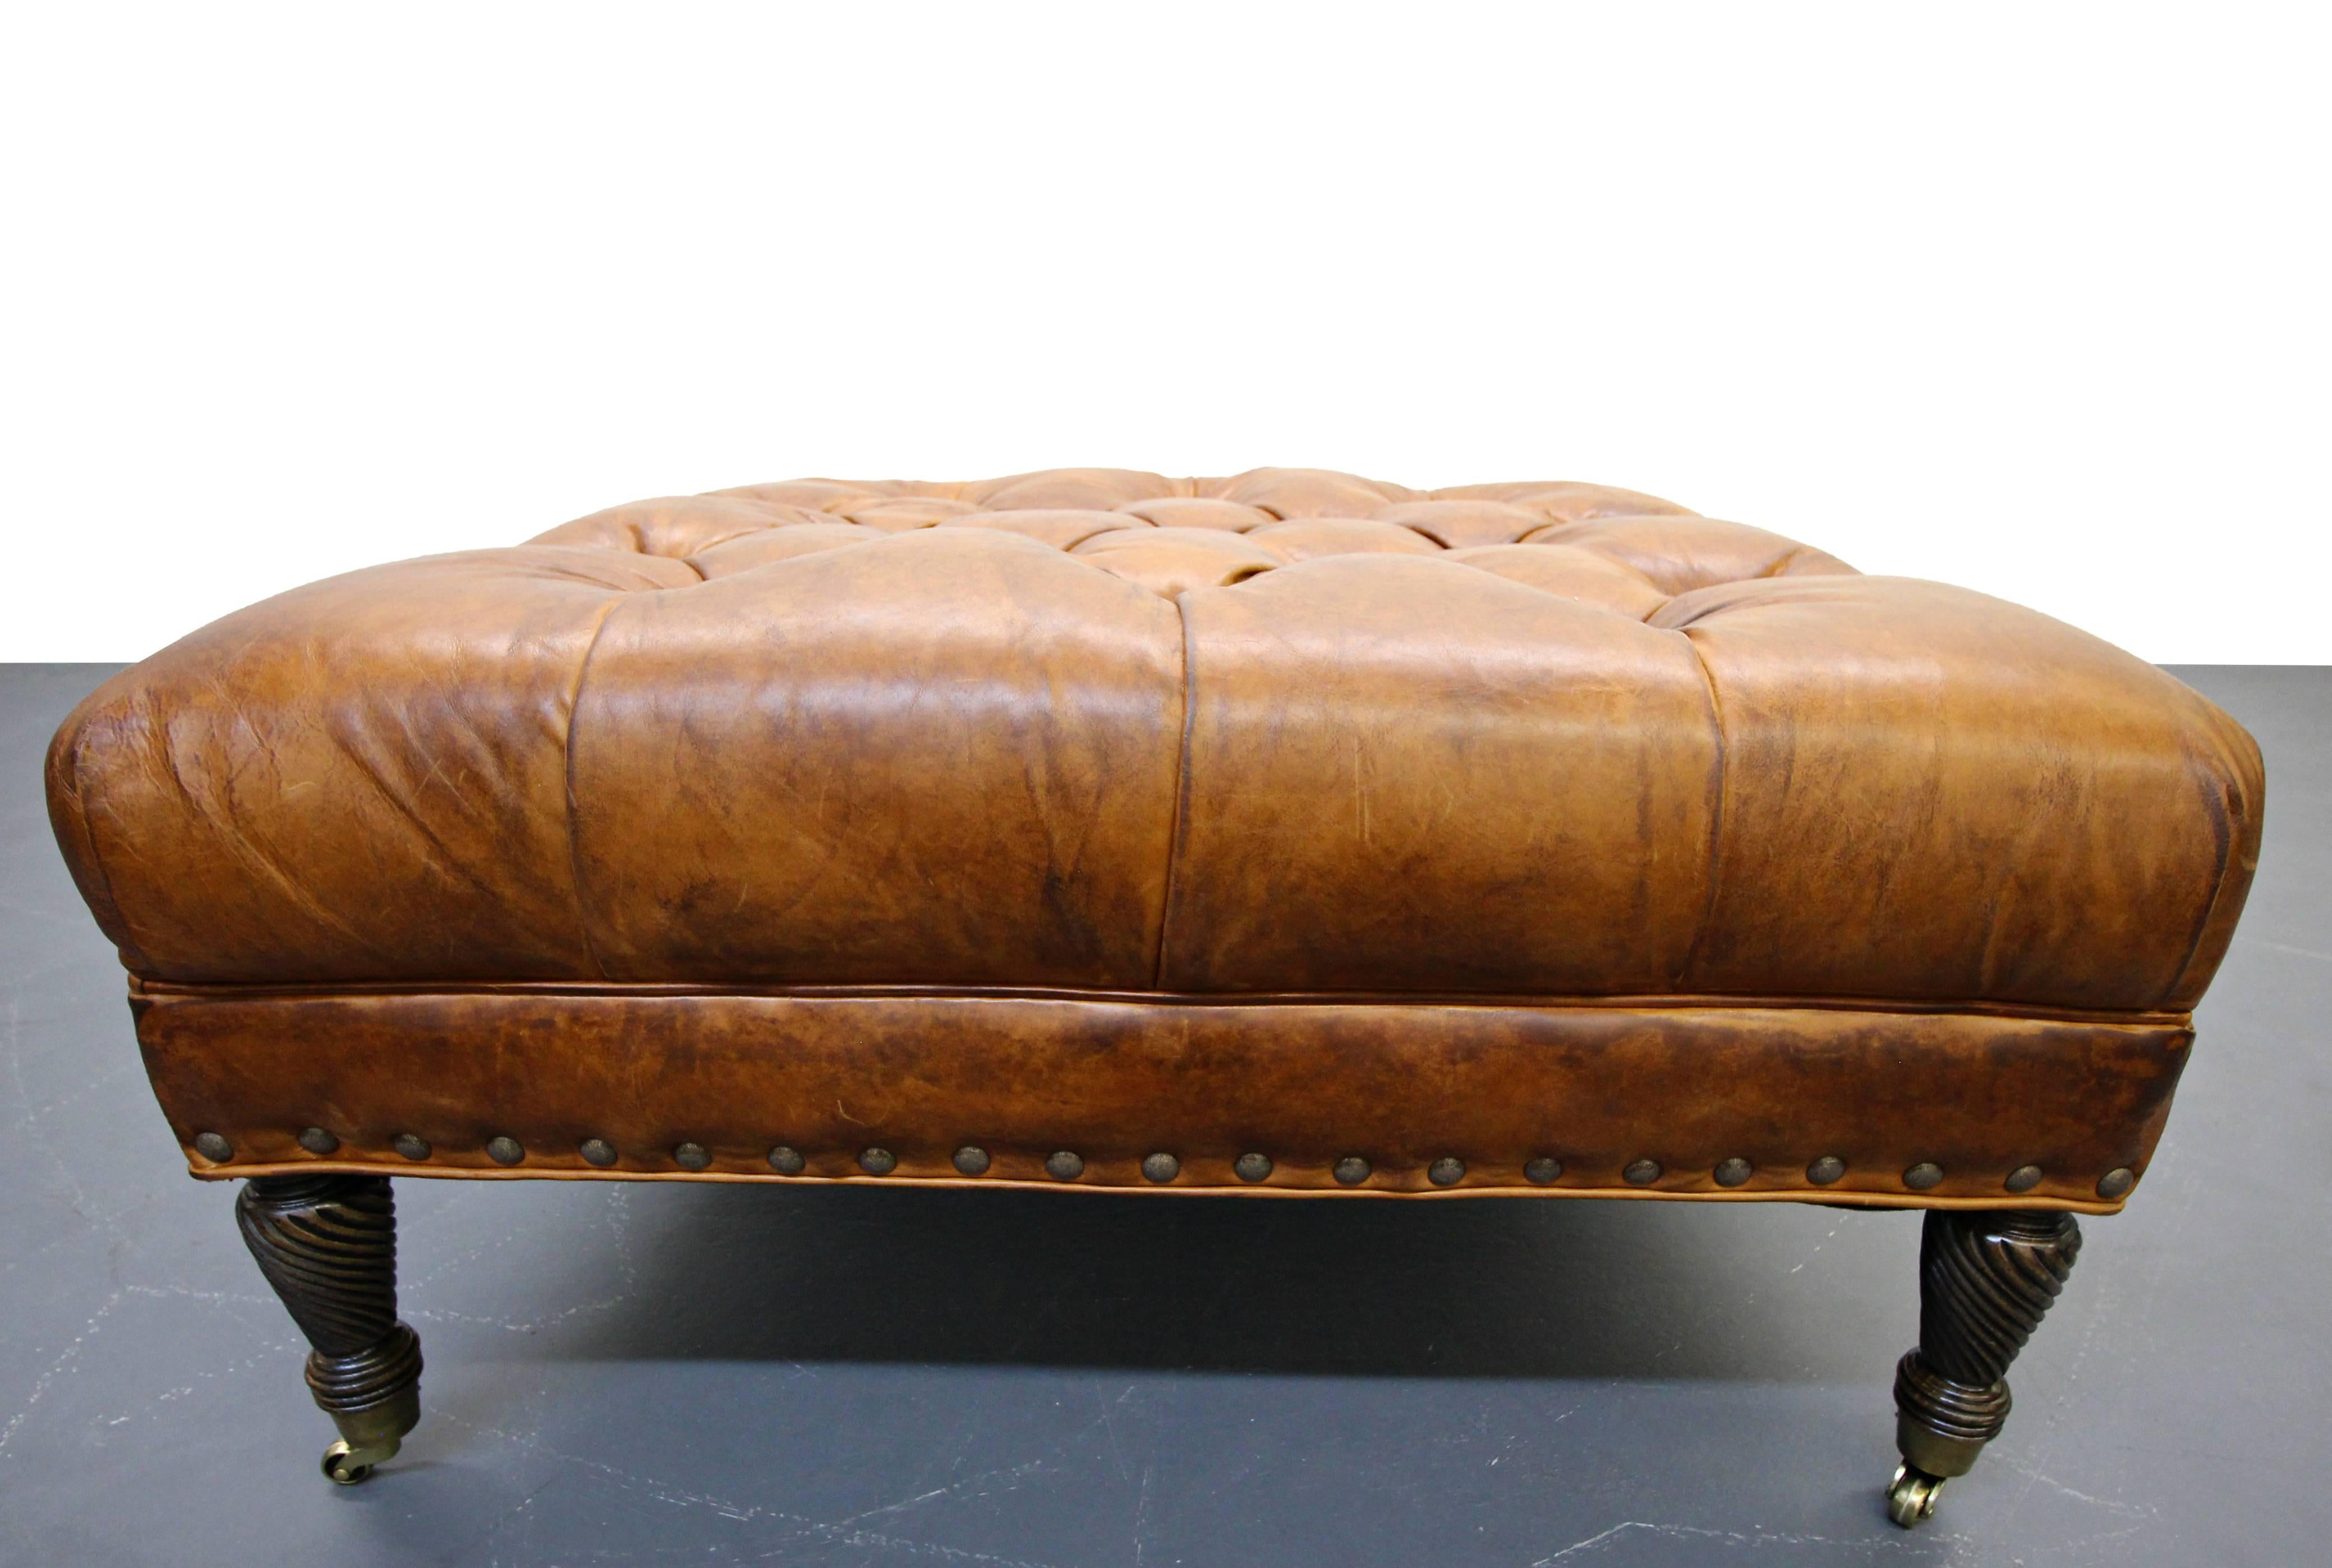 Beautiful tufted leather ottoman with gorgeous patina to the leather. This ottoman is the picture perfect accent piece to any living space. It would make a great coffee table or accent bench. It is a beautiful caramel color brown with small brass